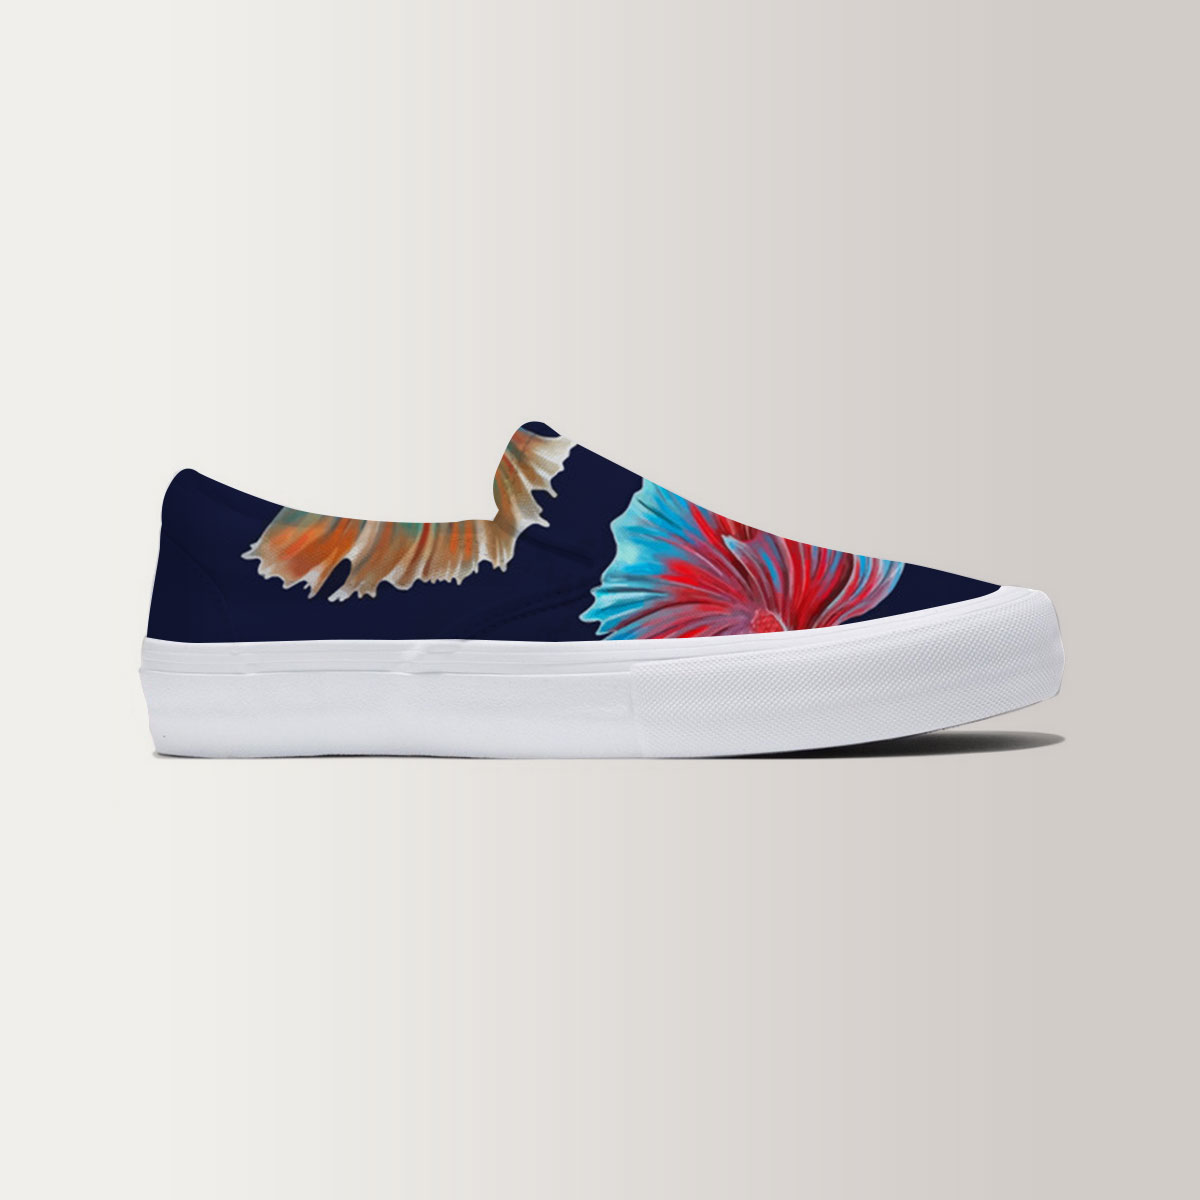 Iconic Four Betta Fish Slip On Sneakers